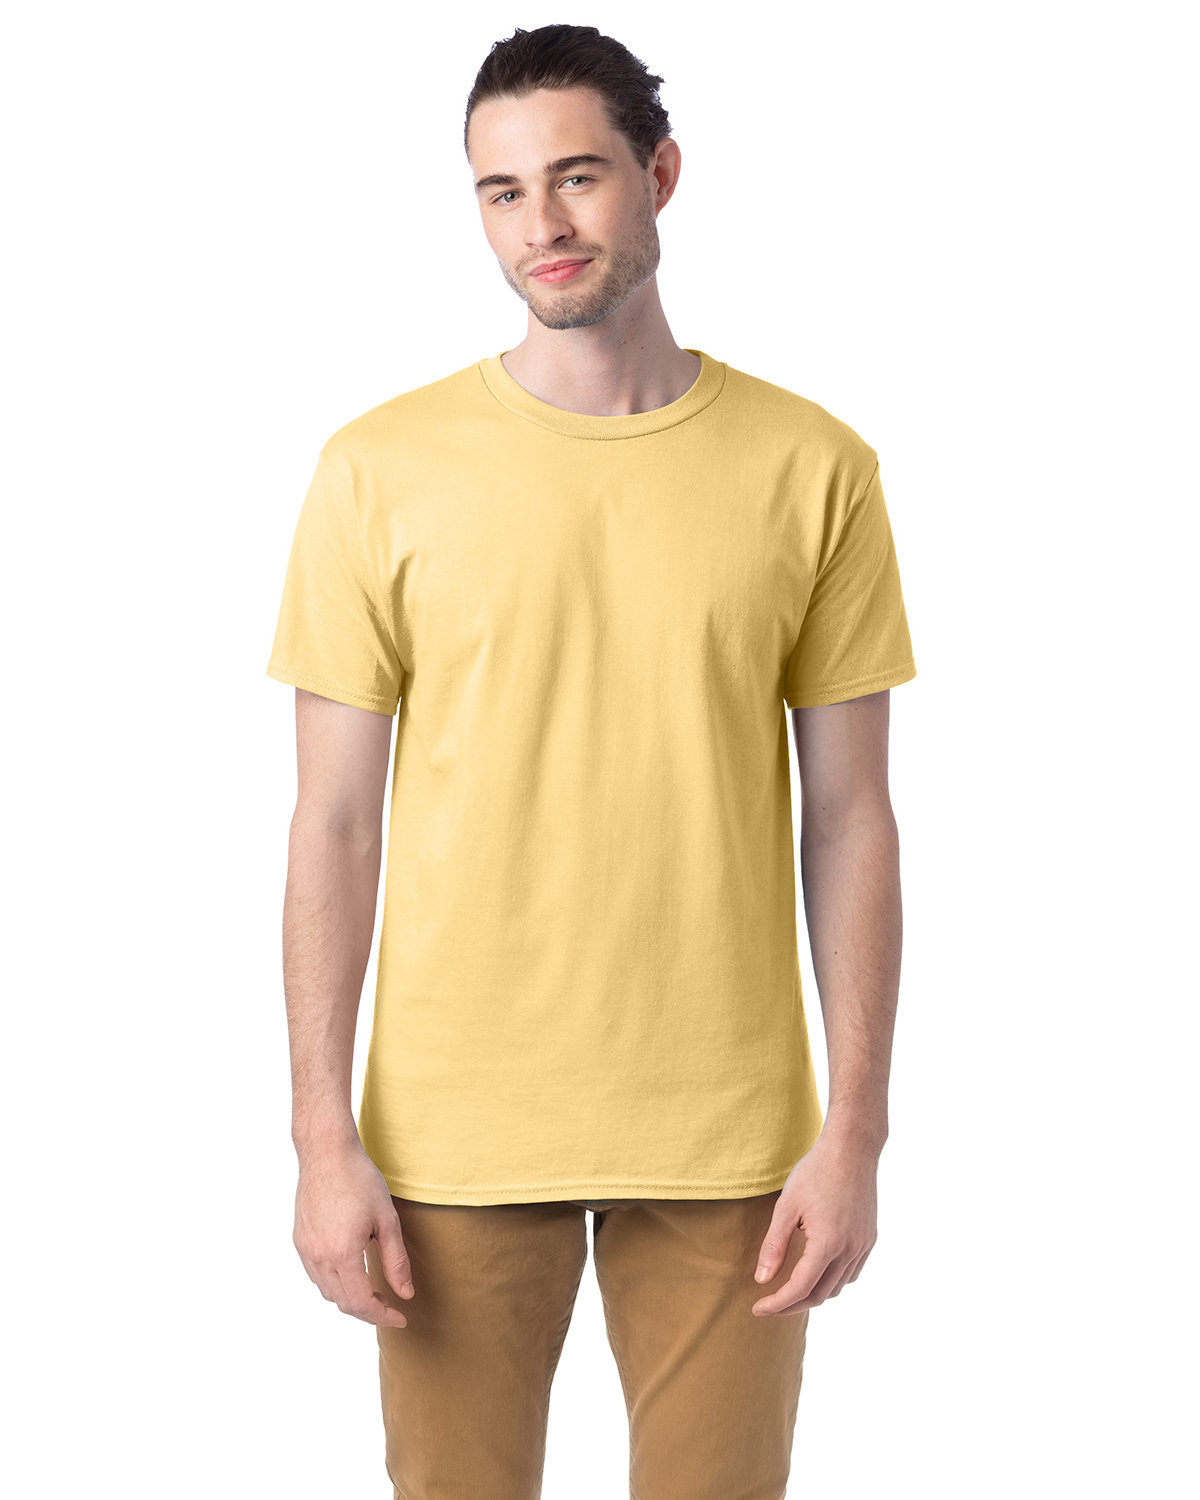 Hanes Adult Essential Short Sleeve T-Shirt athletic gold 